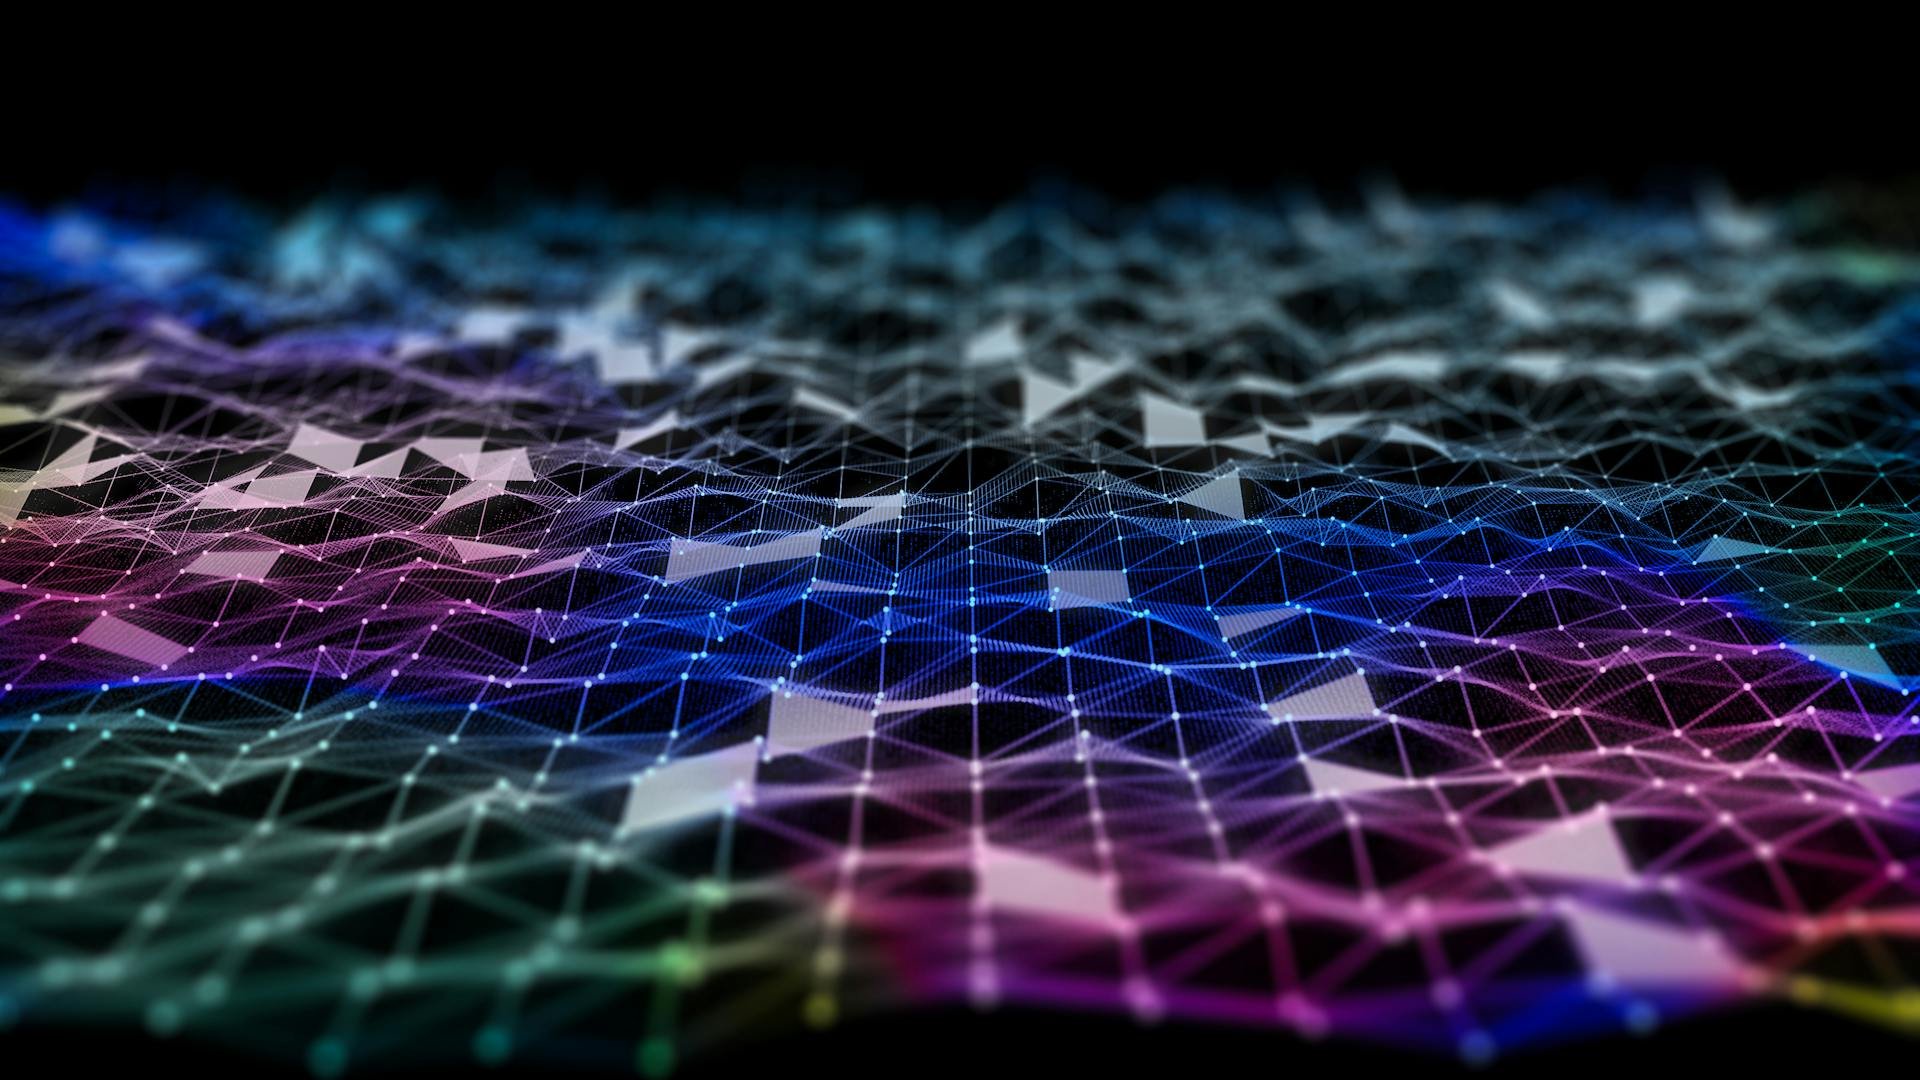 A digital representation of a network grid with interconnected nodes and lines, featuring a multicolored, low-poly, wireframe landscape.